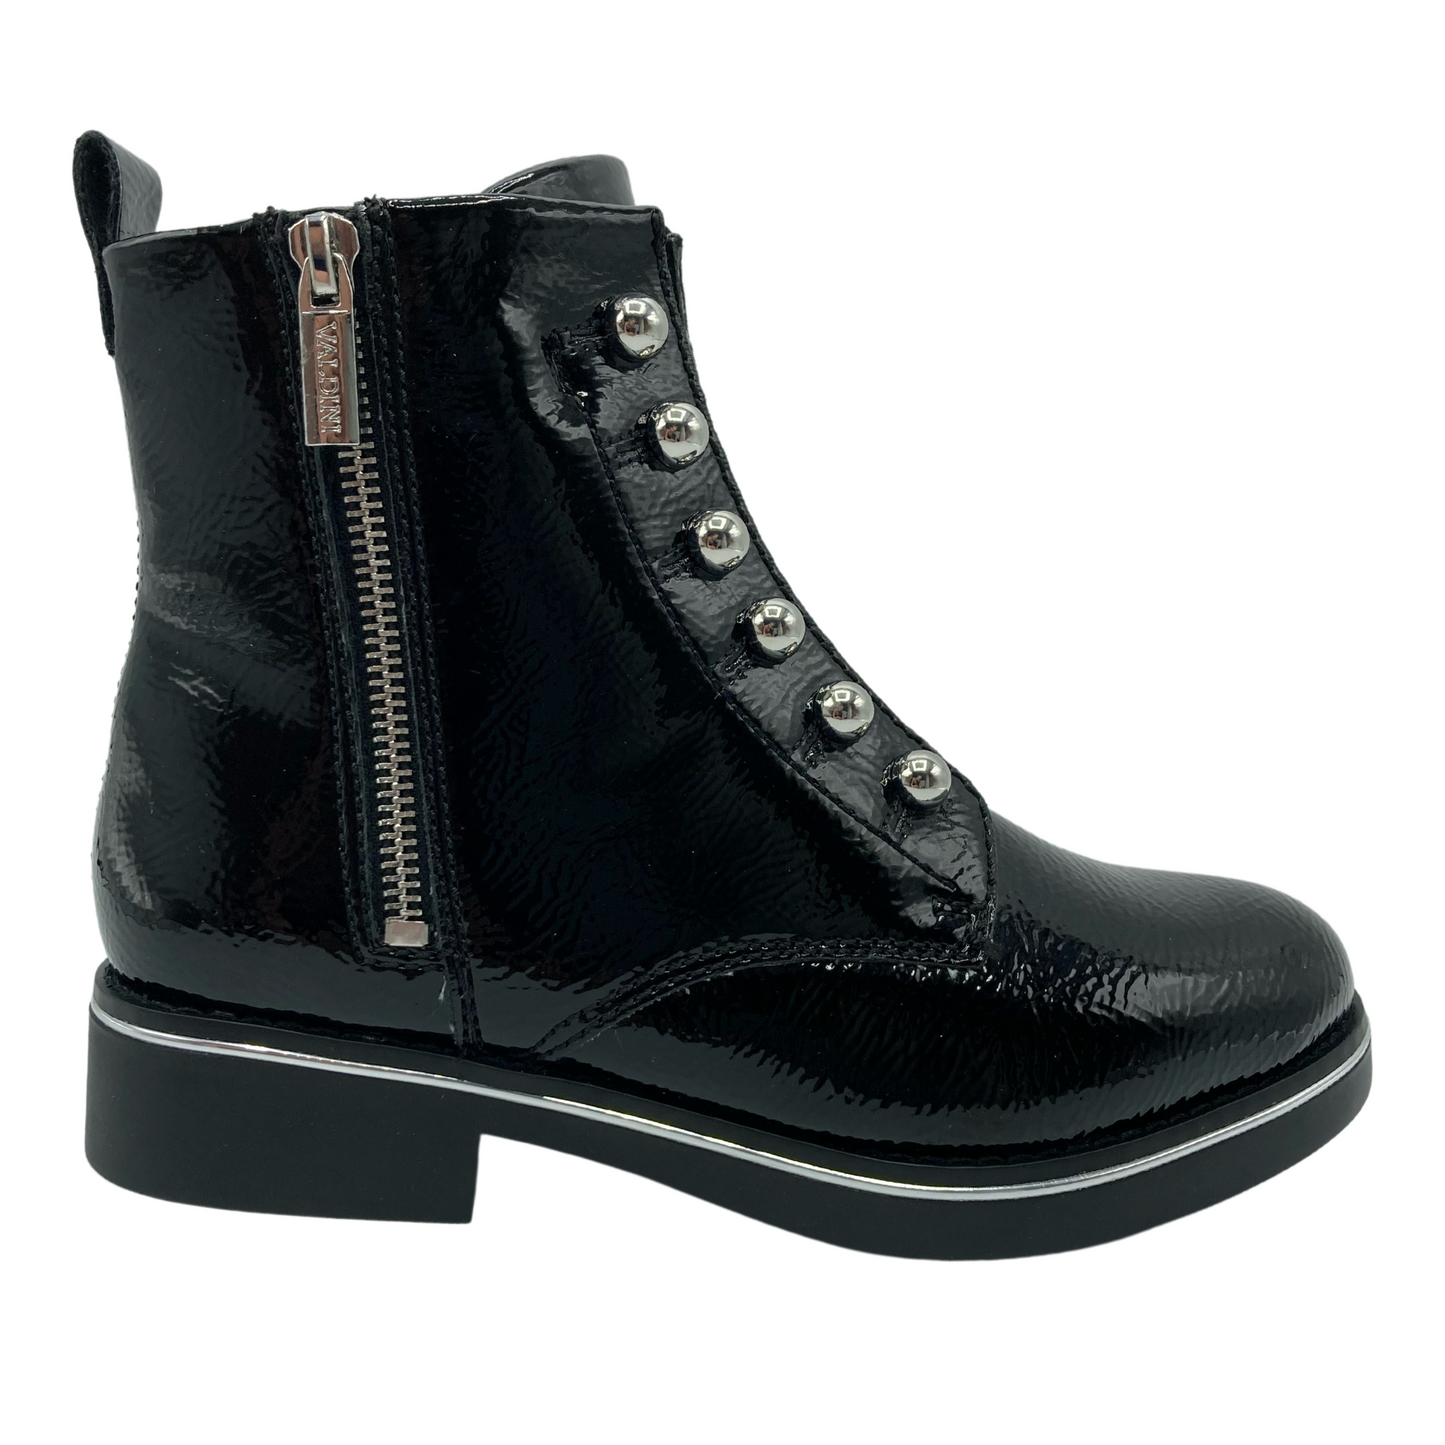 Right facing view of black patent short boot with side zipper closure and pearl buttons up shaft